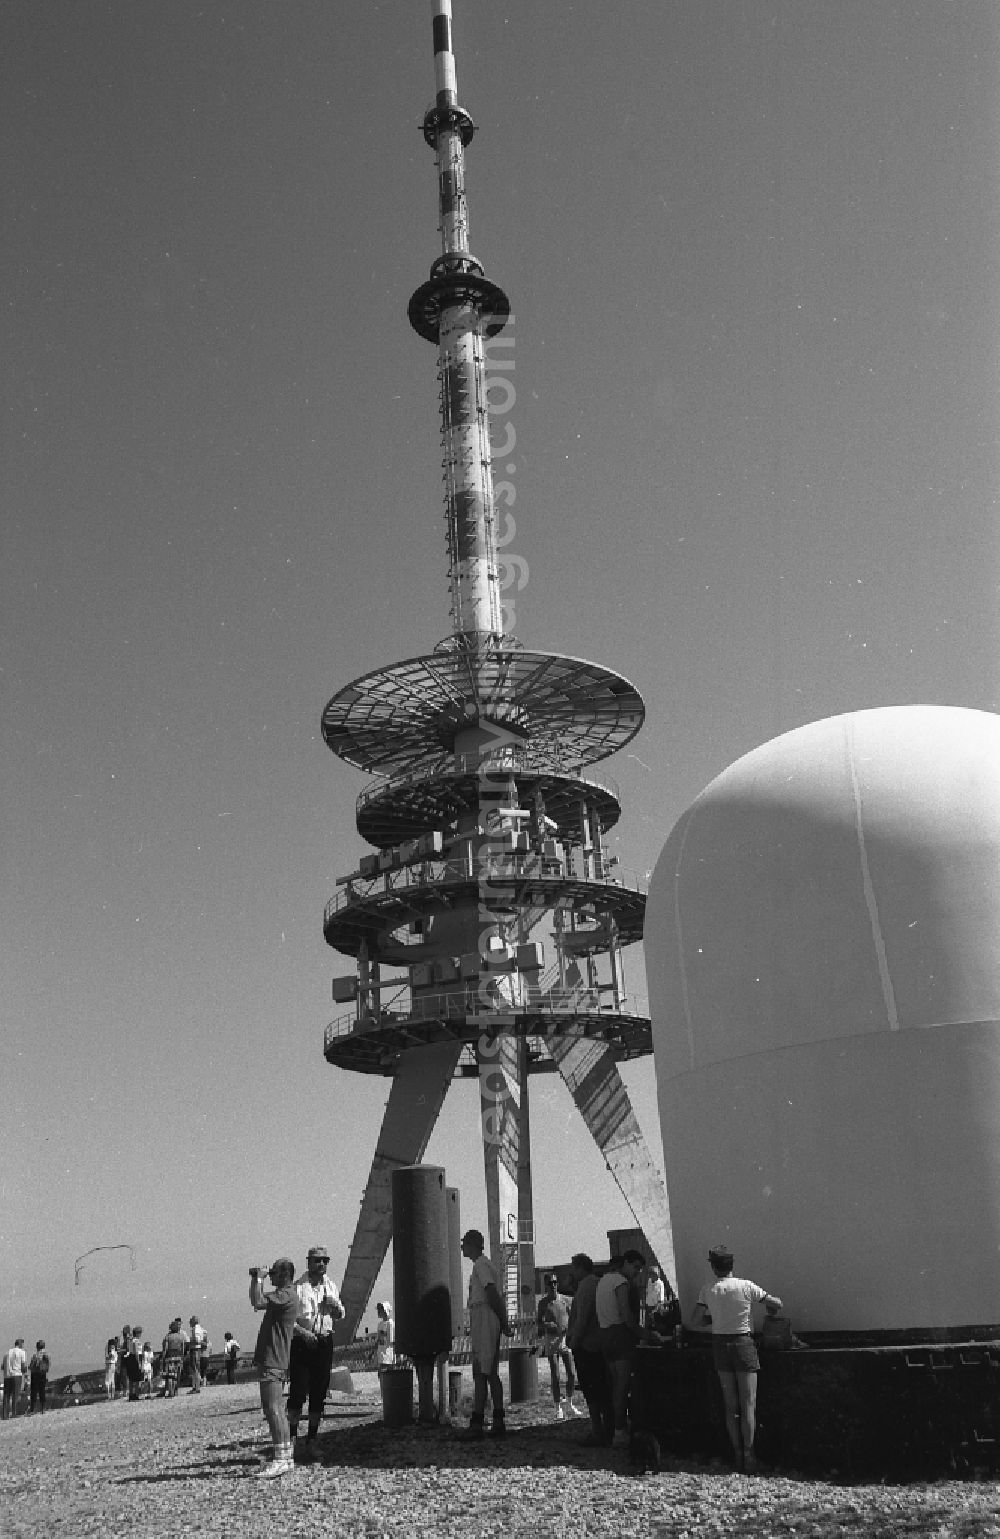 GDR photo archive: Schierke - Transmission and radio technology - military technology of the GSSD - Red Army on the summit of the Brocken Plateau during the first visit by civilians in Schierke in the state of Saxony-Anhalt in the area of the former GDR, German Democratic Republic